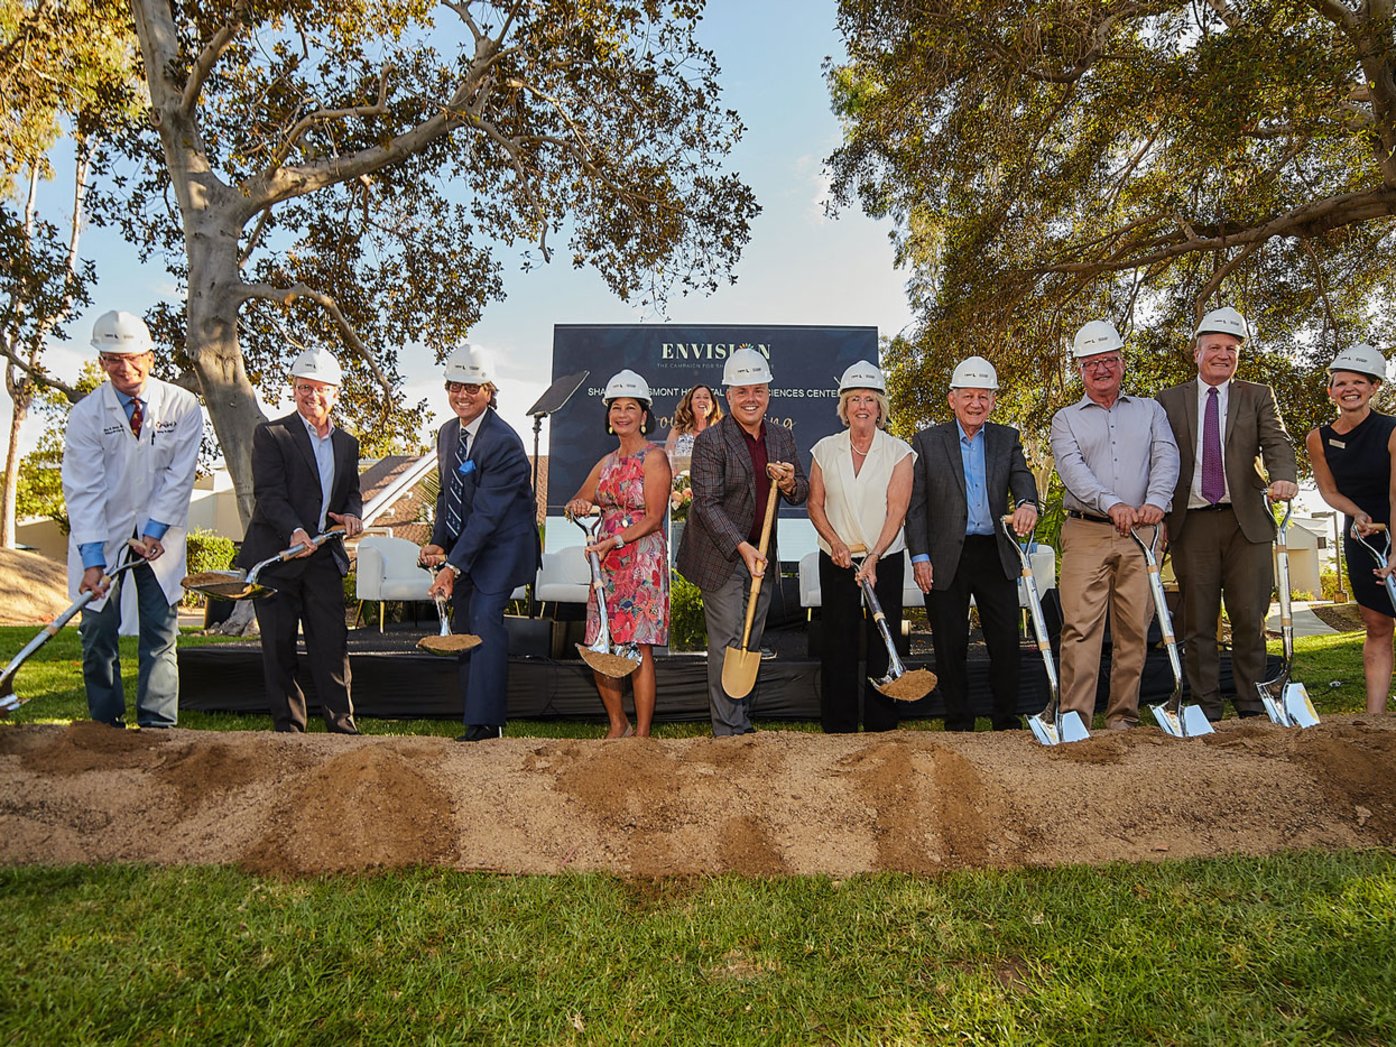 Ten people in hard hats with shovels during event groundbreaking.